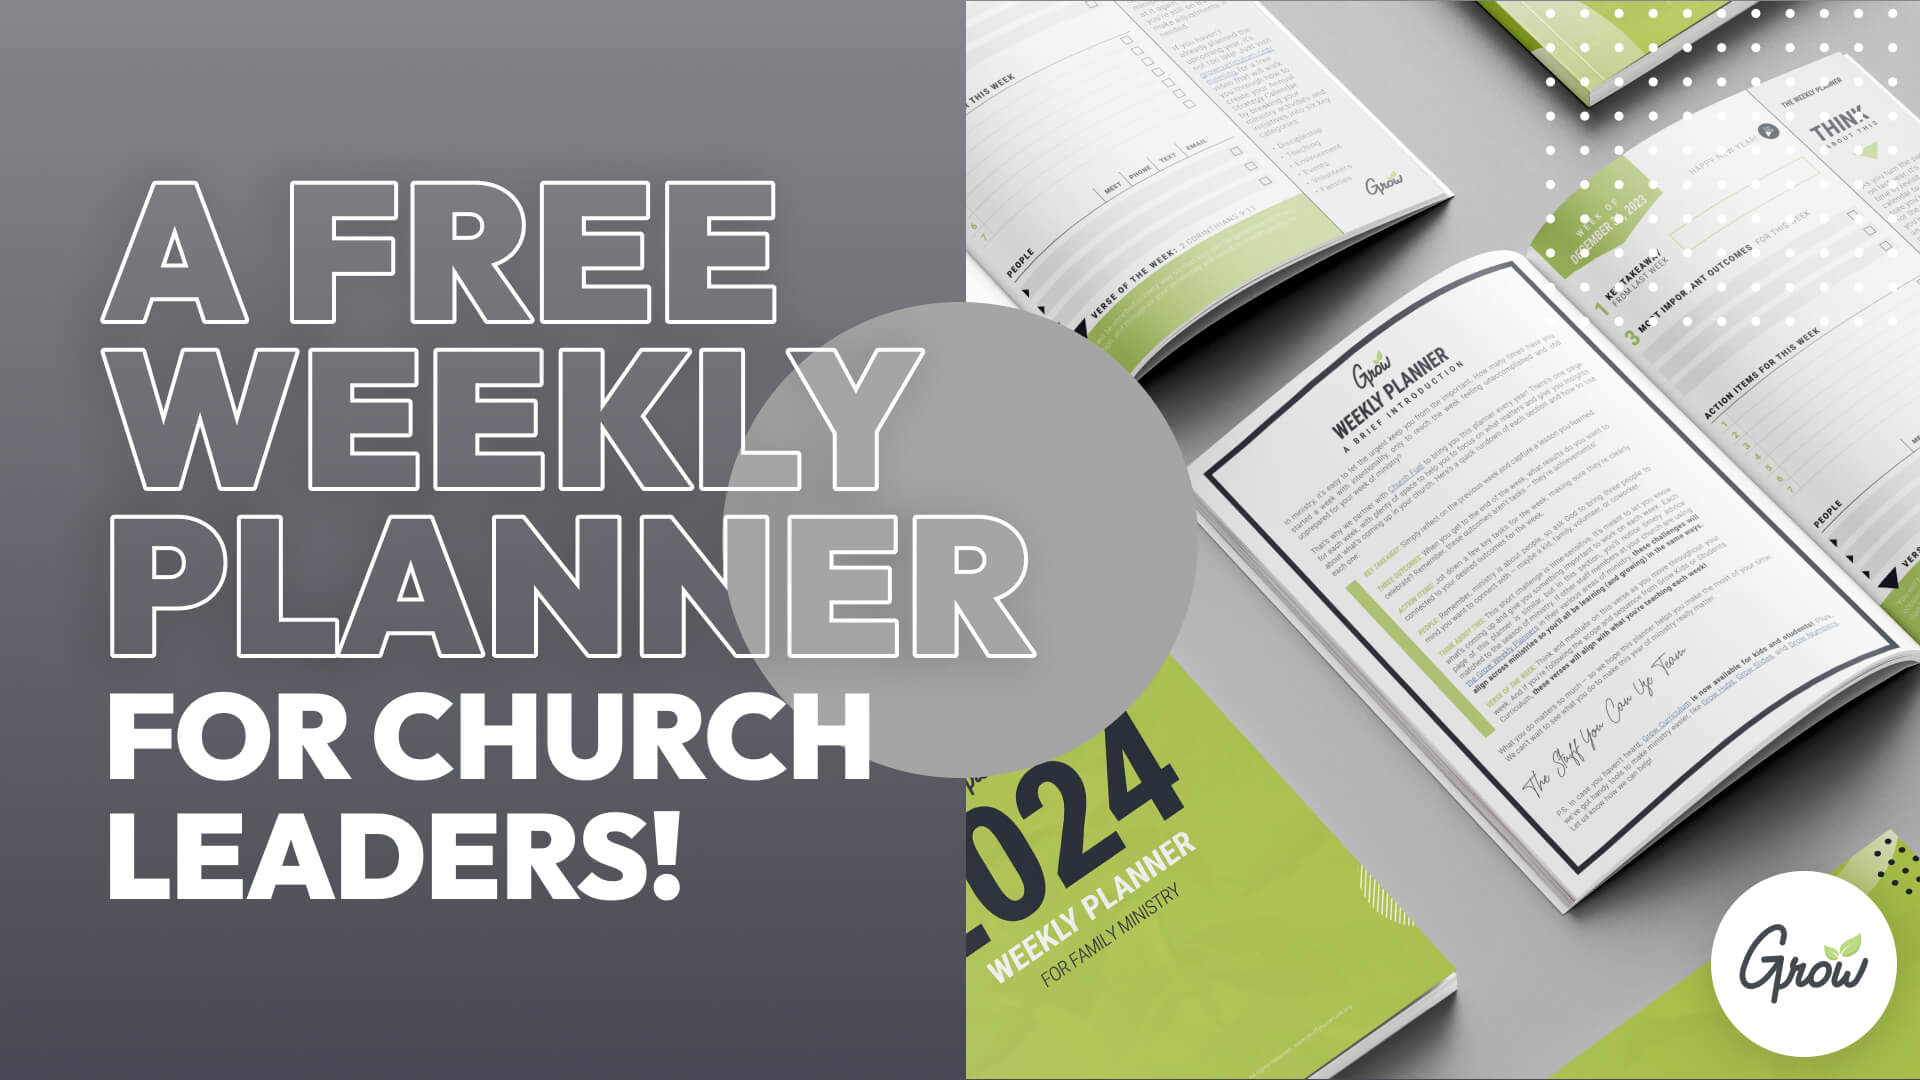 A Free Weekly Planner for Church Leaders!